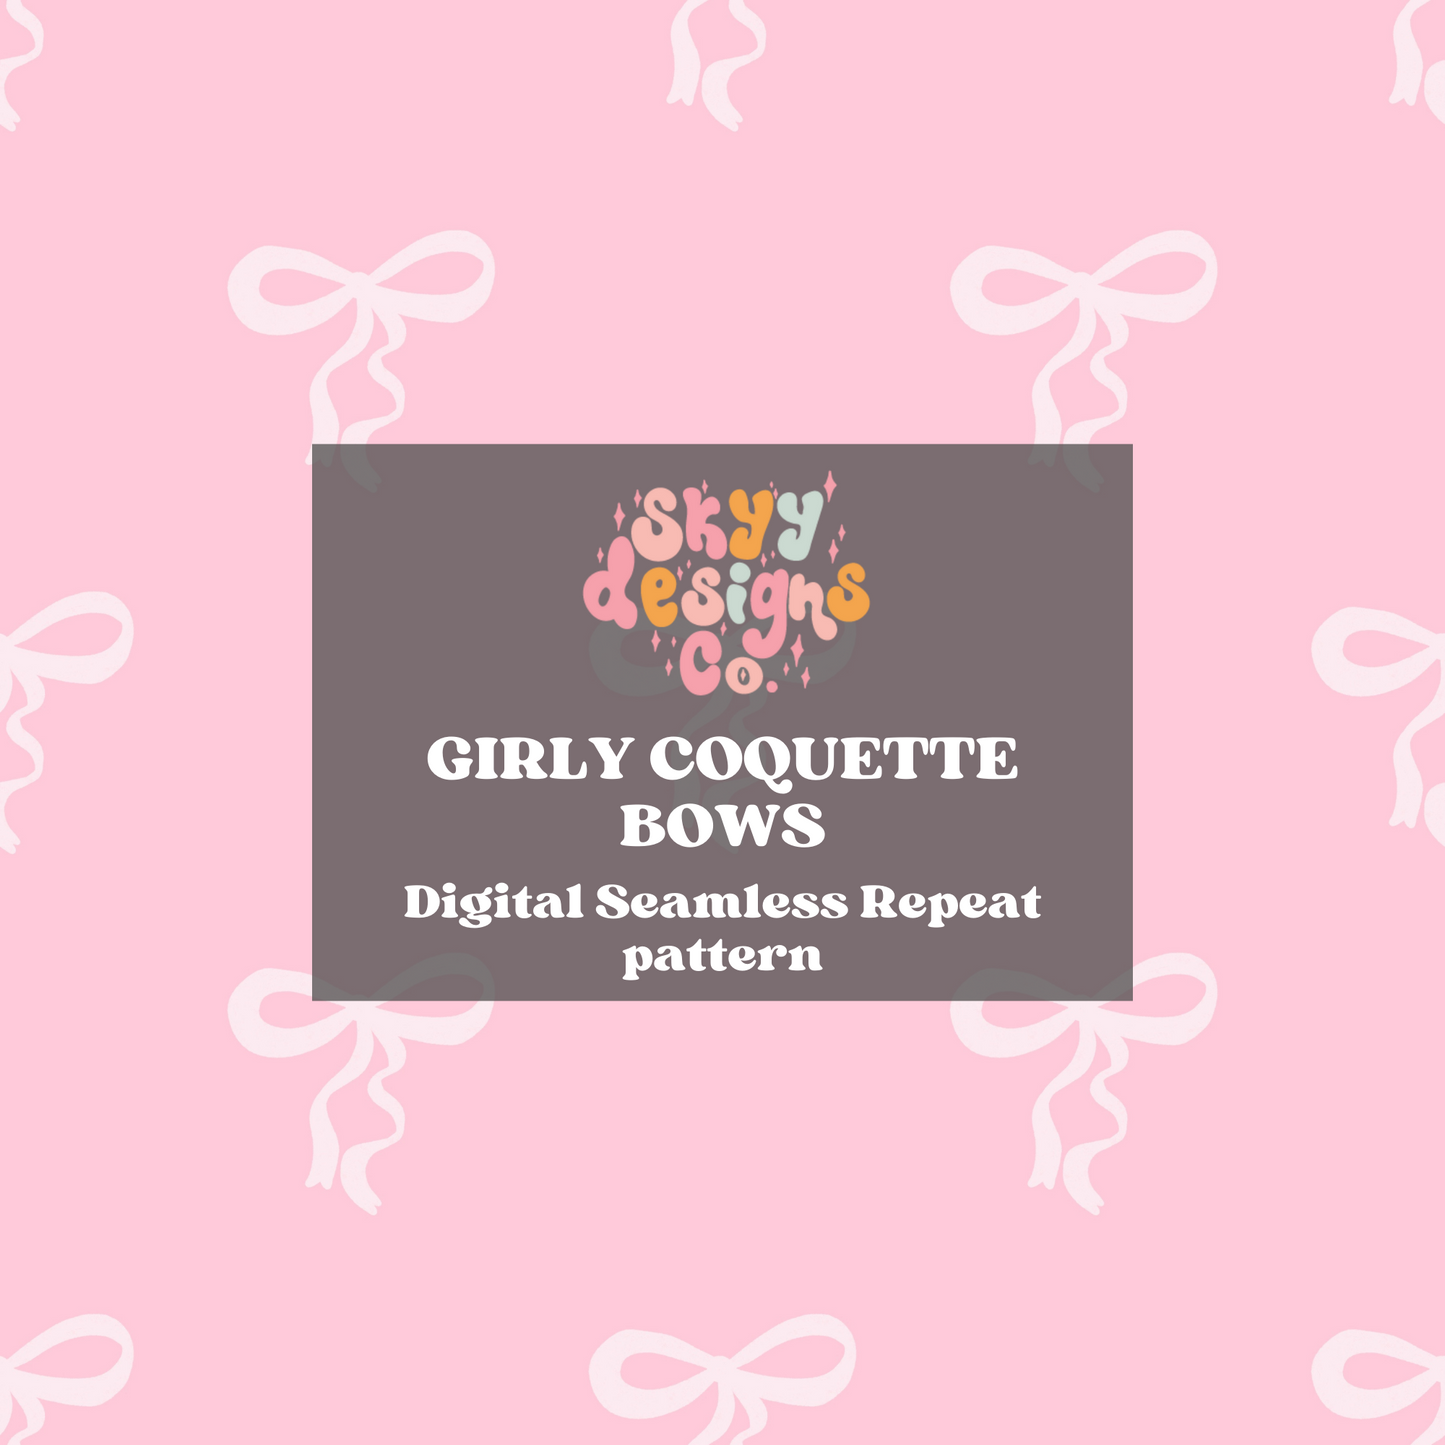 Girly coquette bow Pattern